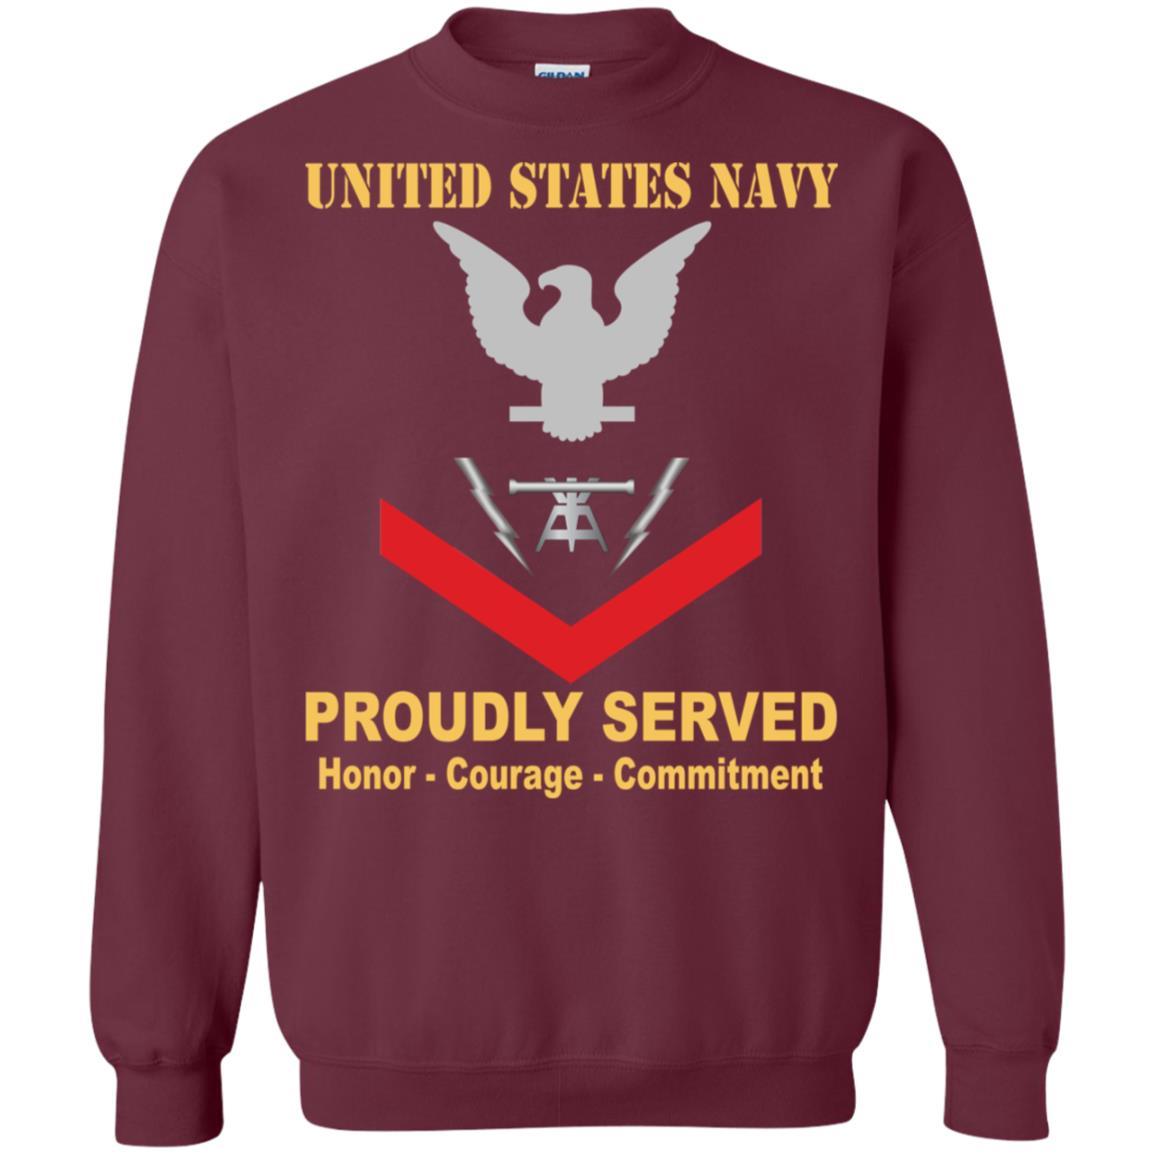 Navy Fire Controlman Navy FC E-4 Rating Badges Proudly Served T-Shirt For Men On Front-TShirt-Navy-Veterans Nation